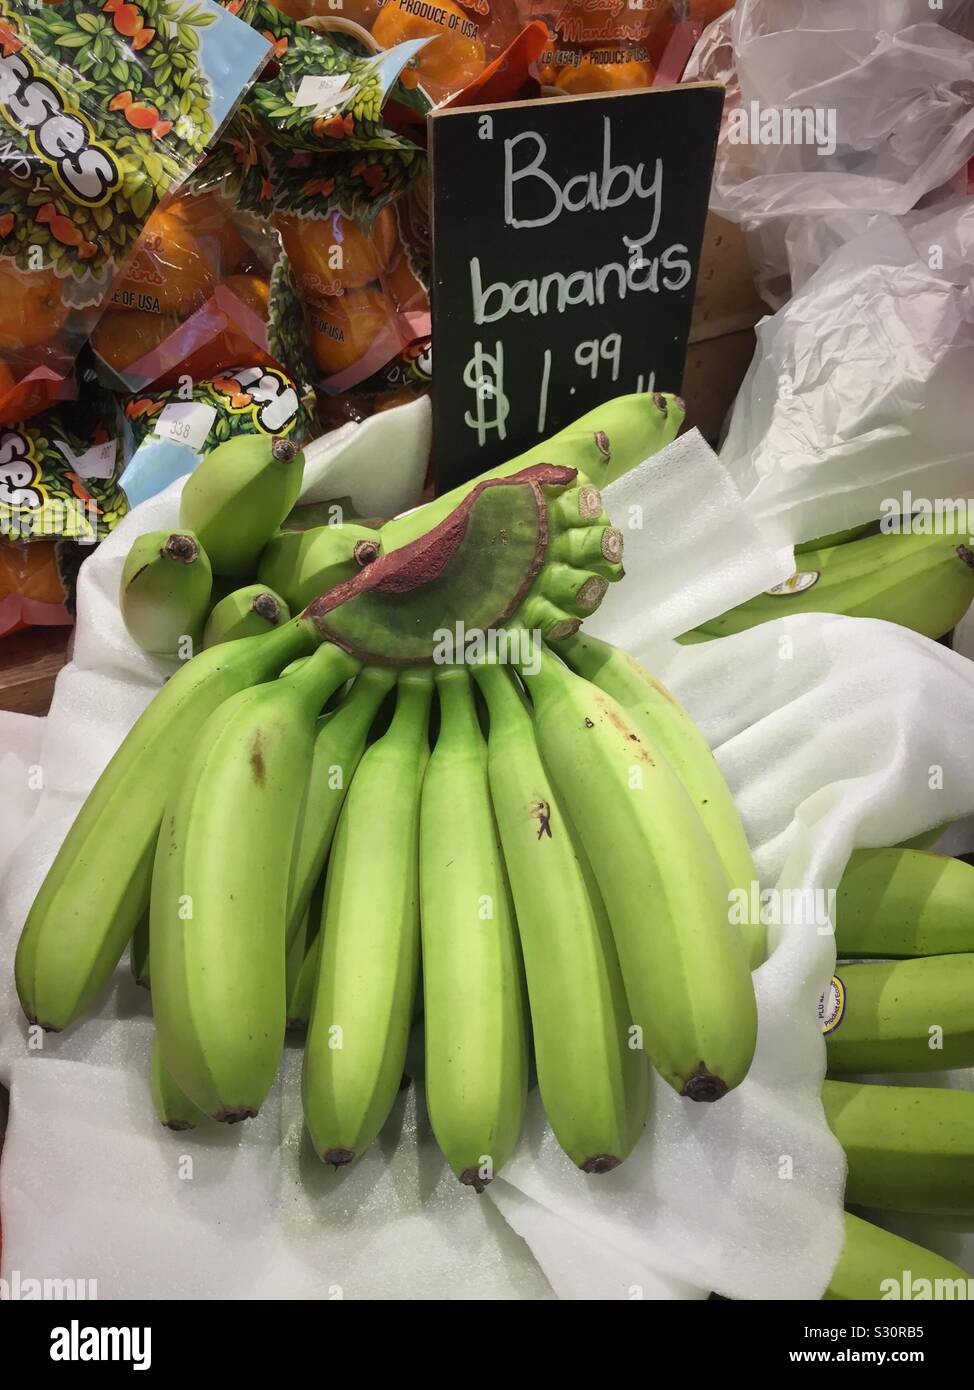 A bunch of baby green bananas for sale in the produce aisle of a grocery store, USA Stock Photo